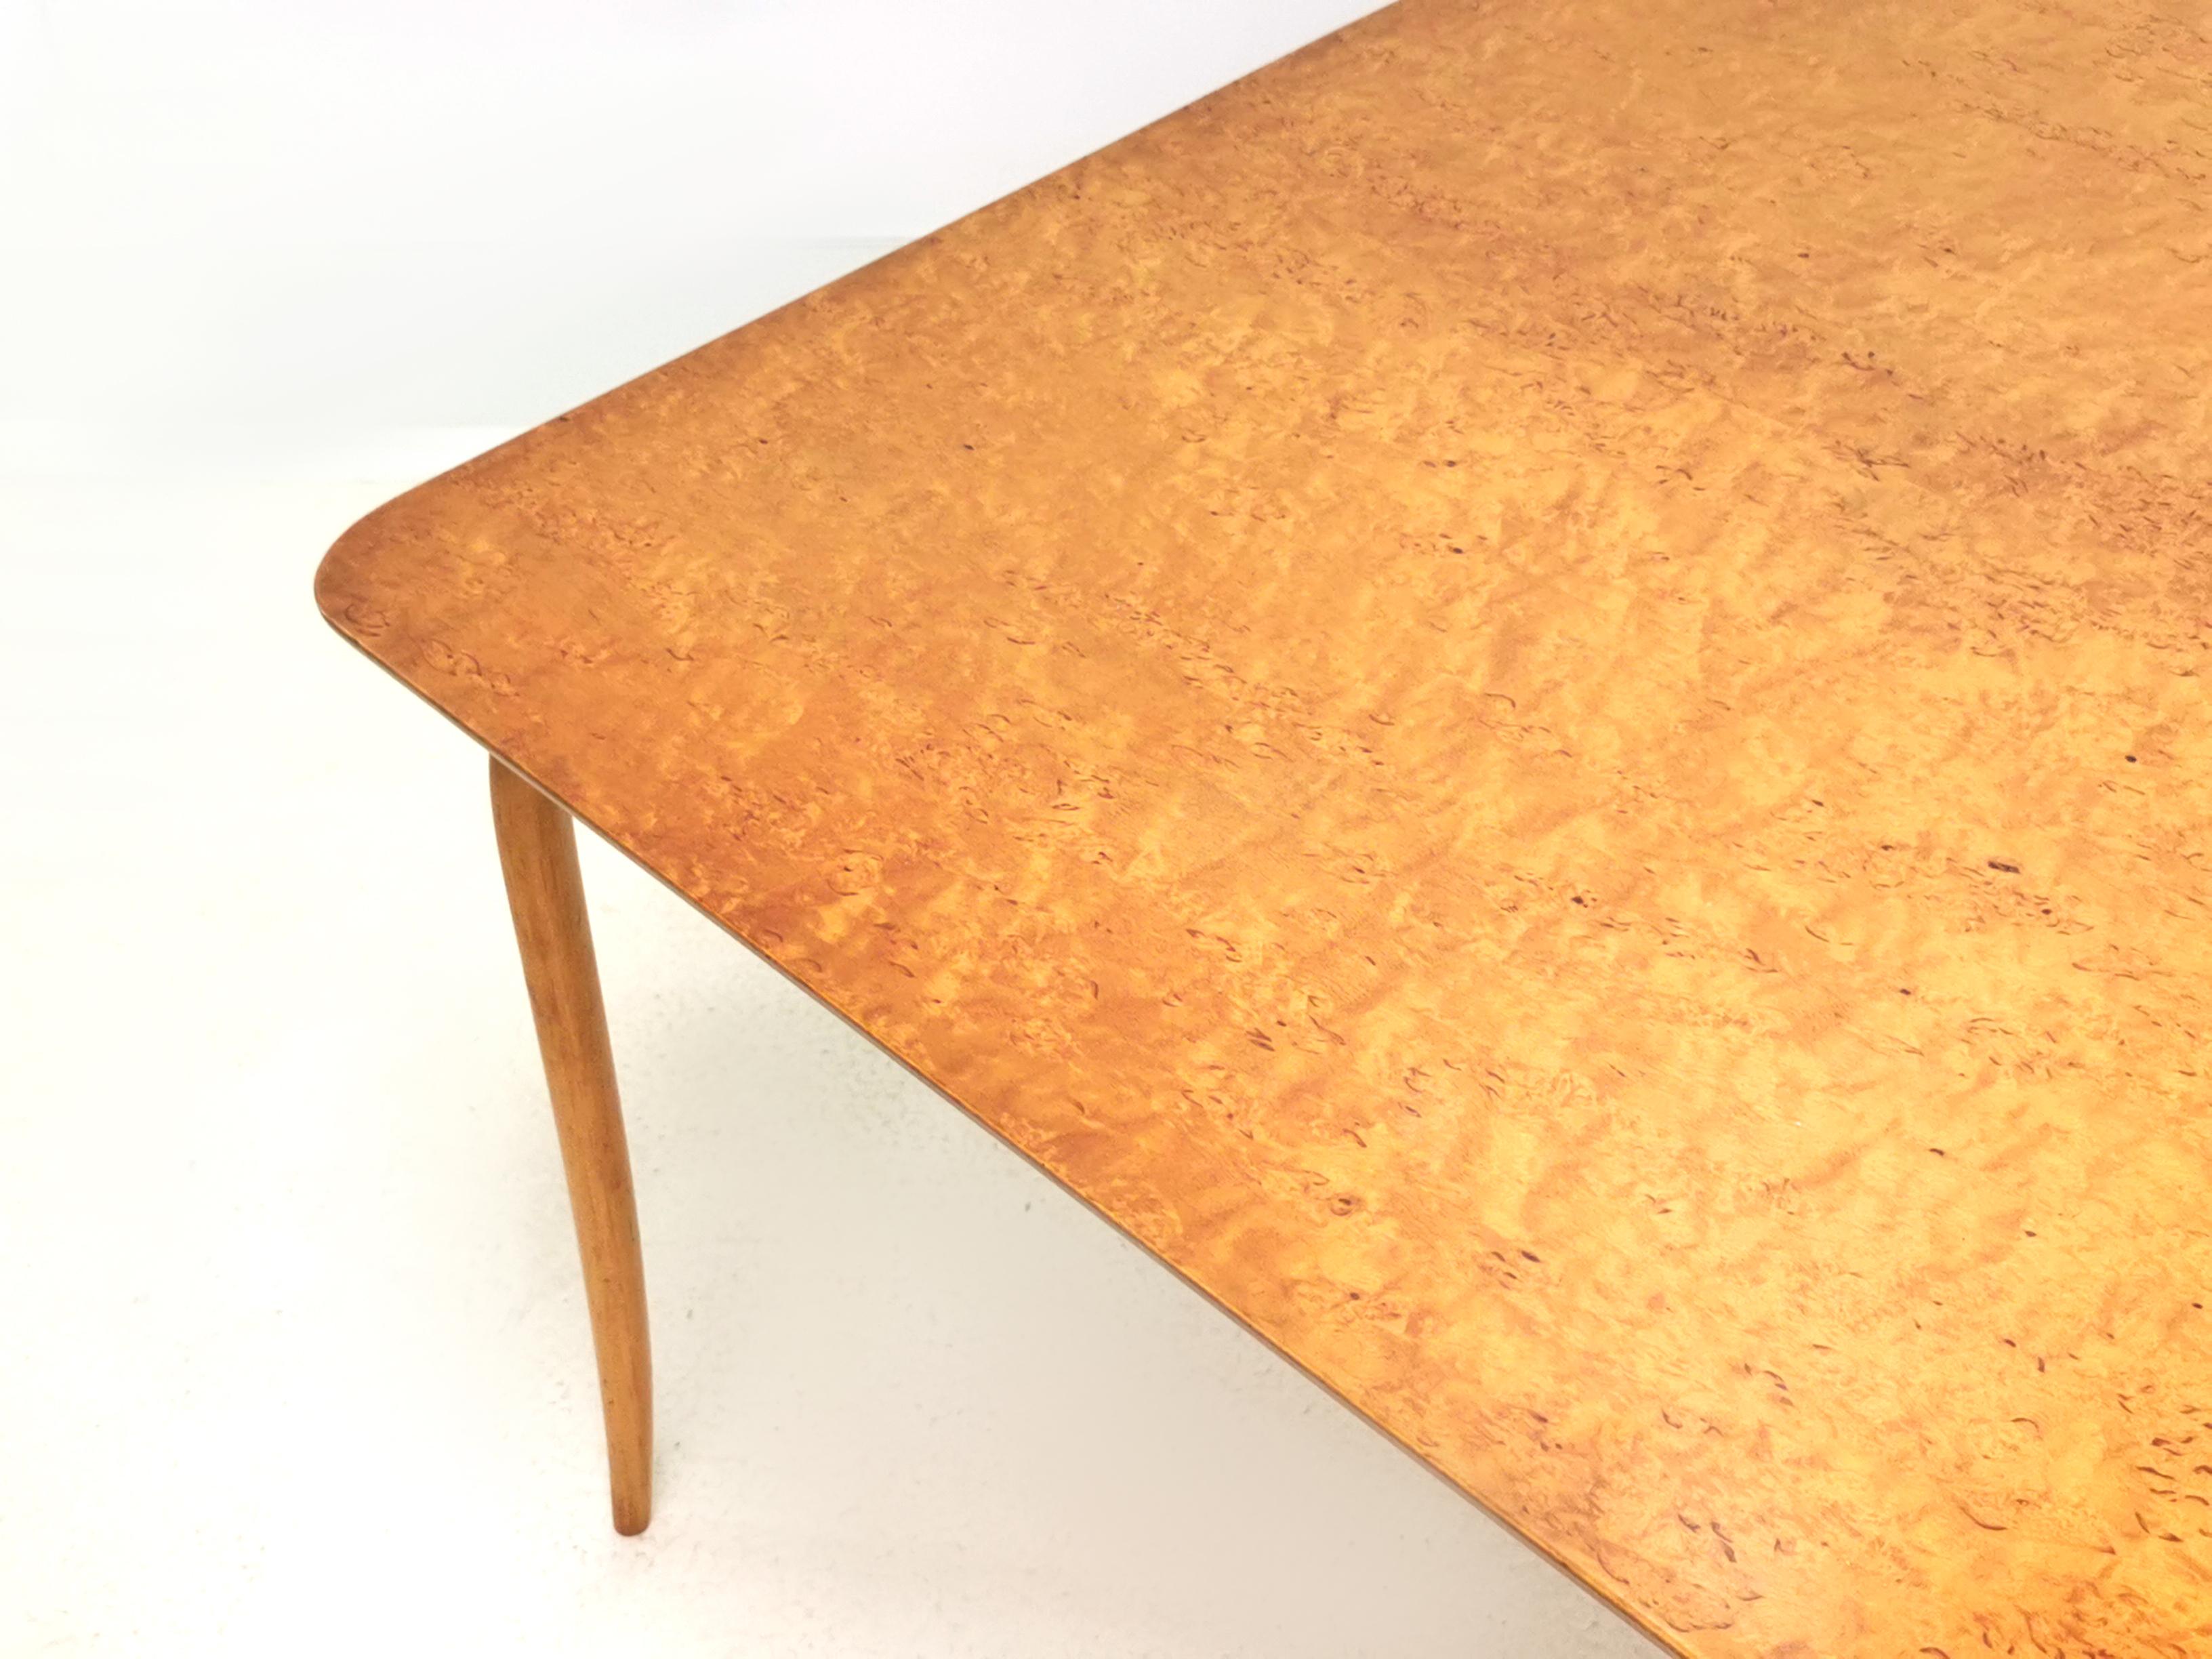 Birdseye Maple Mid Century coffee table

A square 'Annika' Mid-Century Birdseye maple coffee table by Bruno Mathsson

Designed by Bruno Mathsson for Karl Mathsson, Sweden, with a square Birdseye Maple top with rounded corners raised on laminated